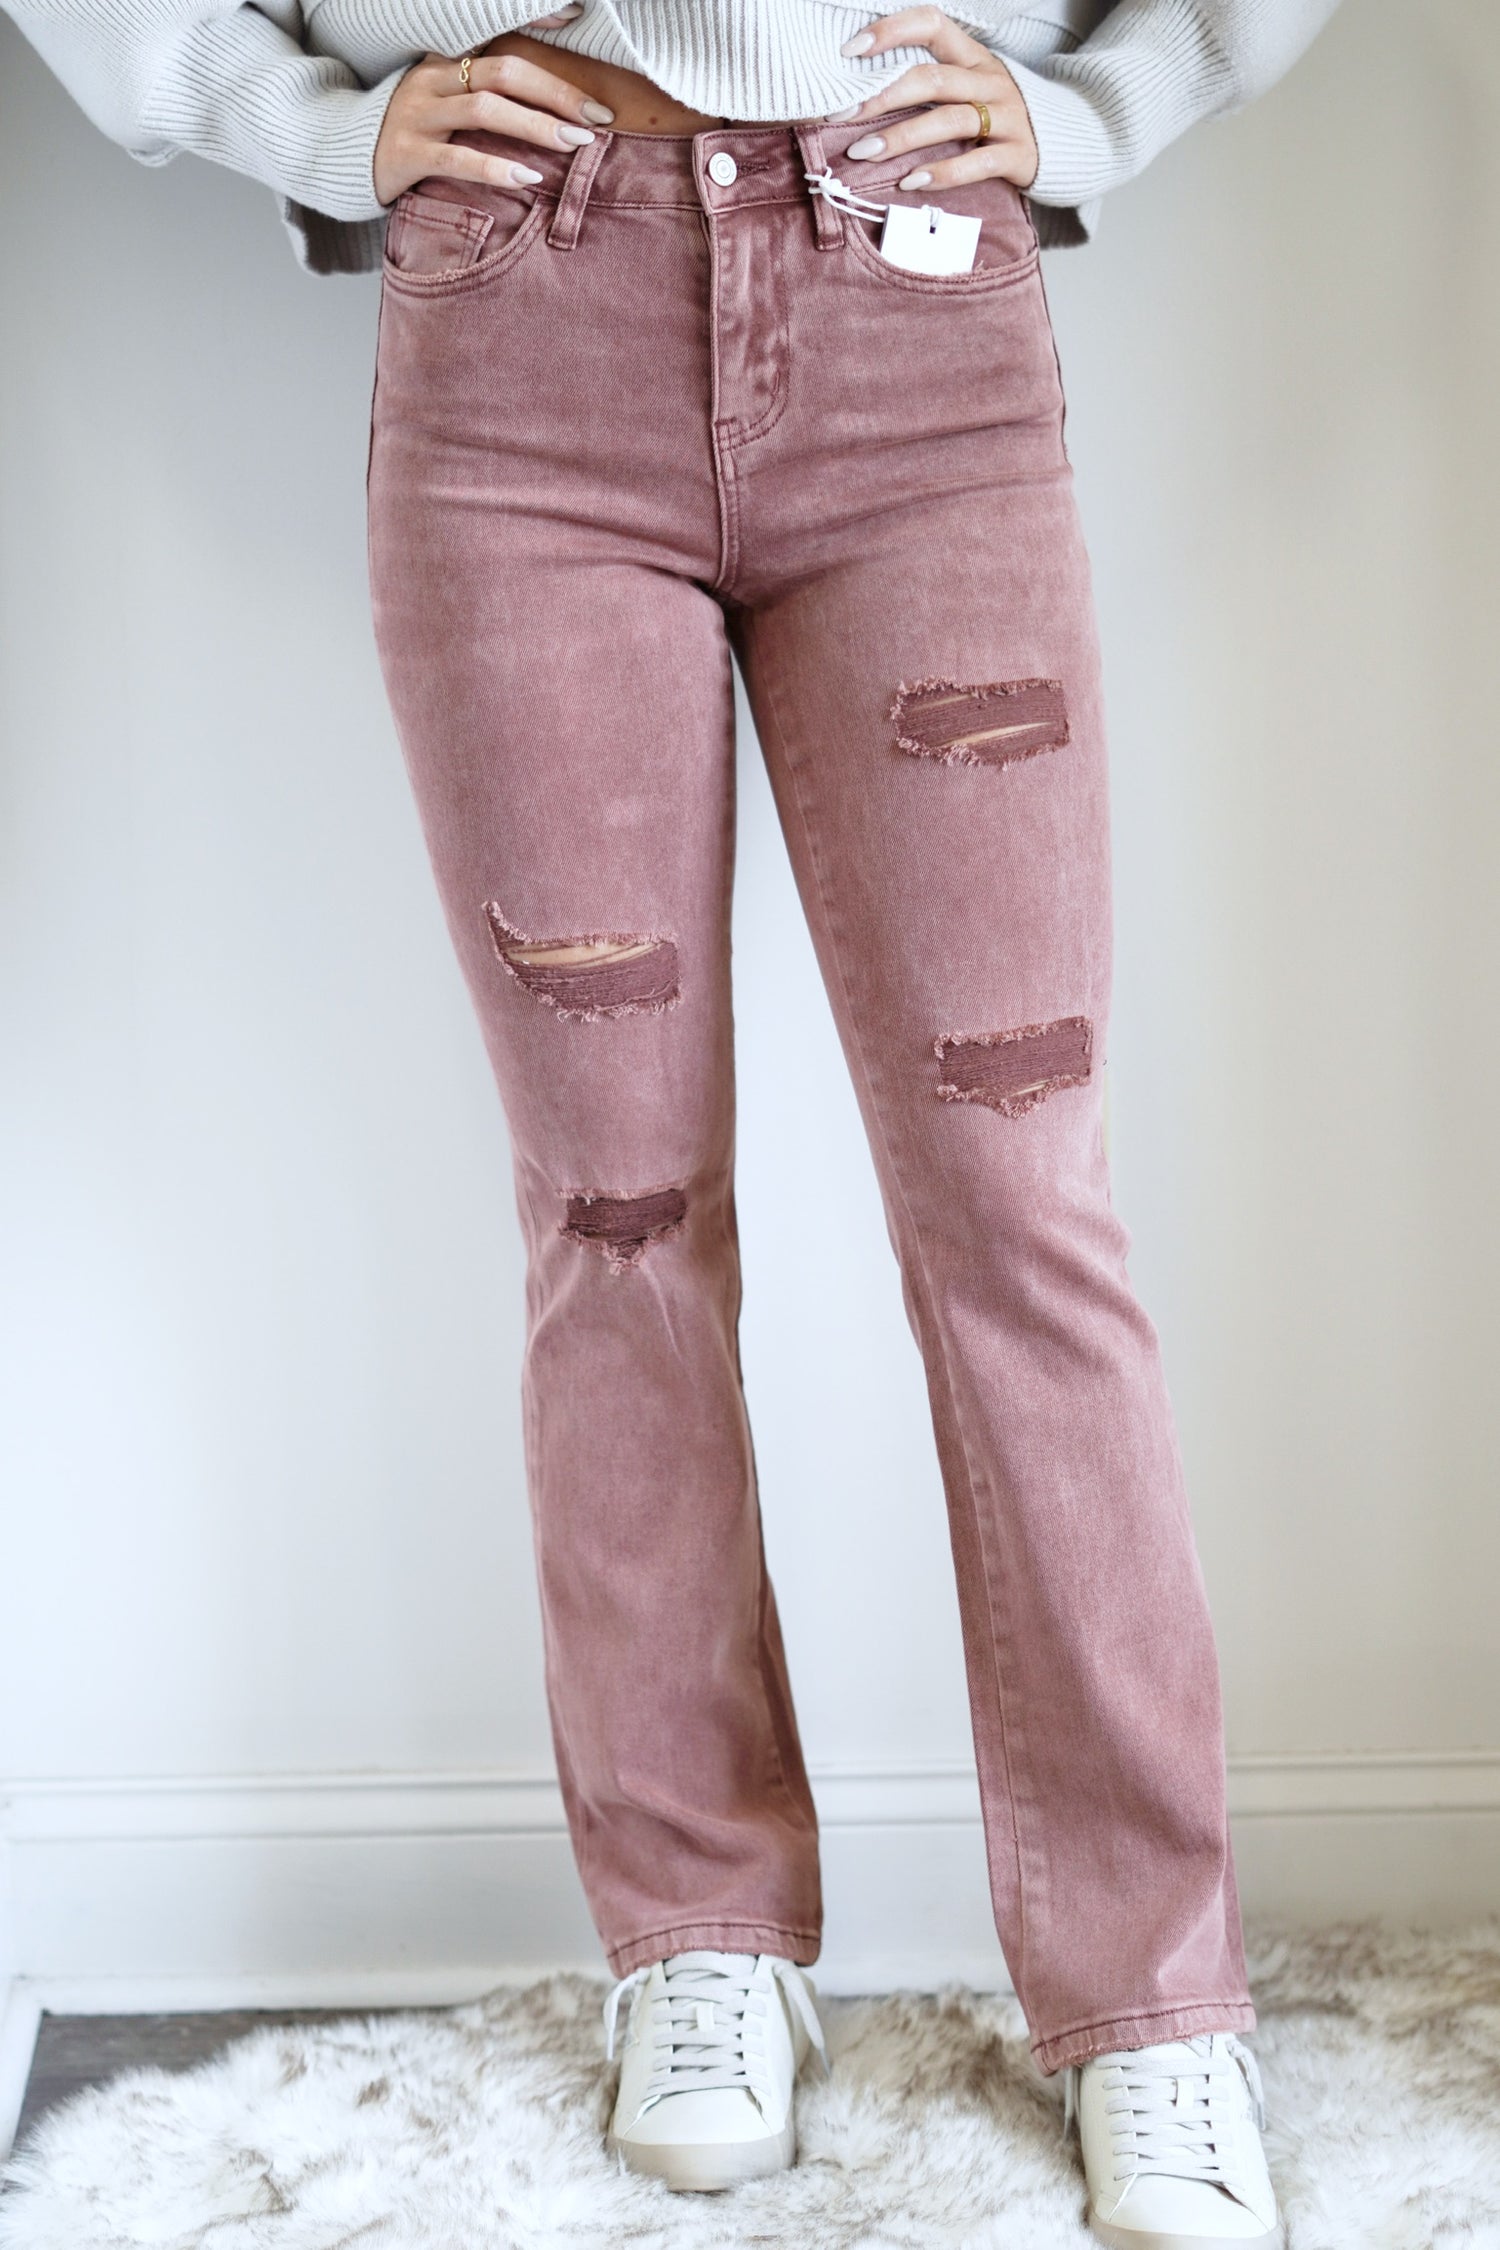 Darling Dusty Rose Cropped Straight Leg Jeans Zipper Fly Straight Leg Cropped Length Fitted Minor Distressing Dusty Rose Color 93% Cotton, 5% Polyester, 2% Spandex Care: Machine wash cold inside out with like colors, Colors will bleed, Do not bleach, Tumble dry low, Warm iron if needed